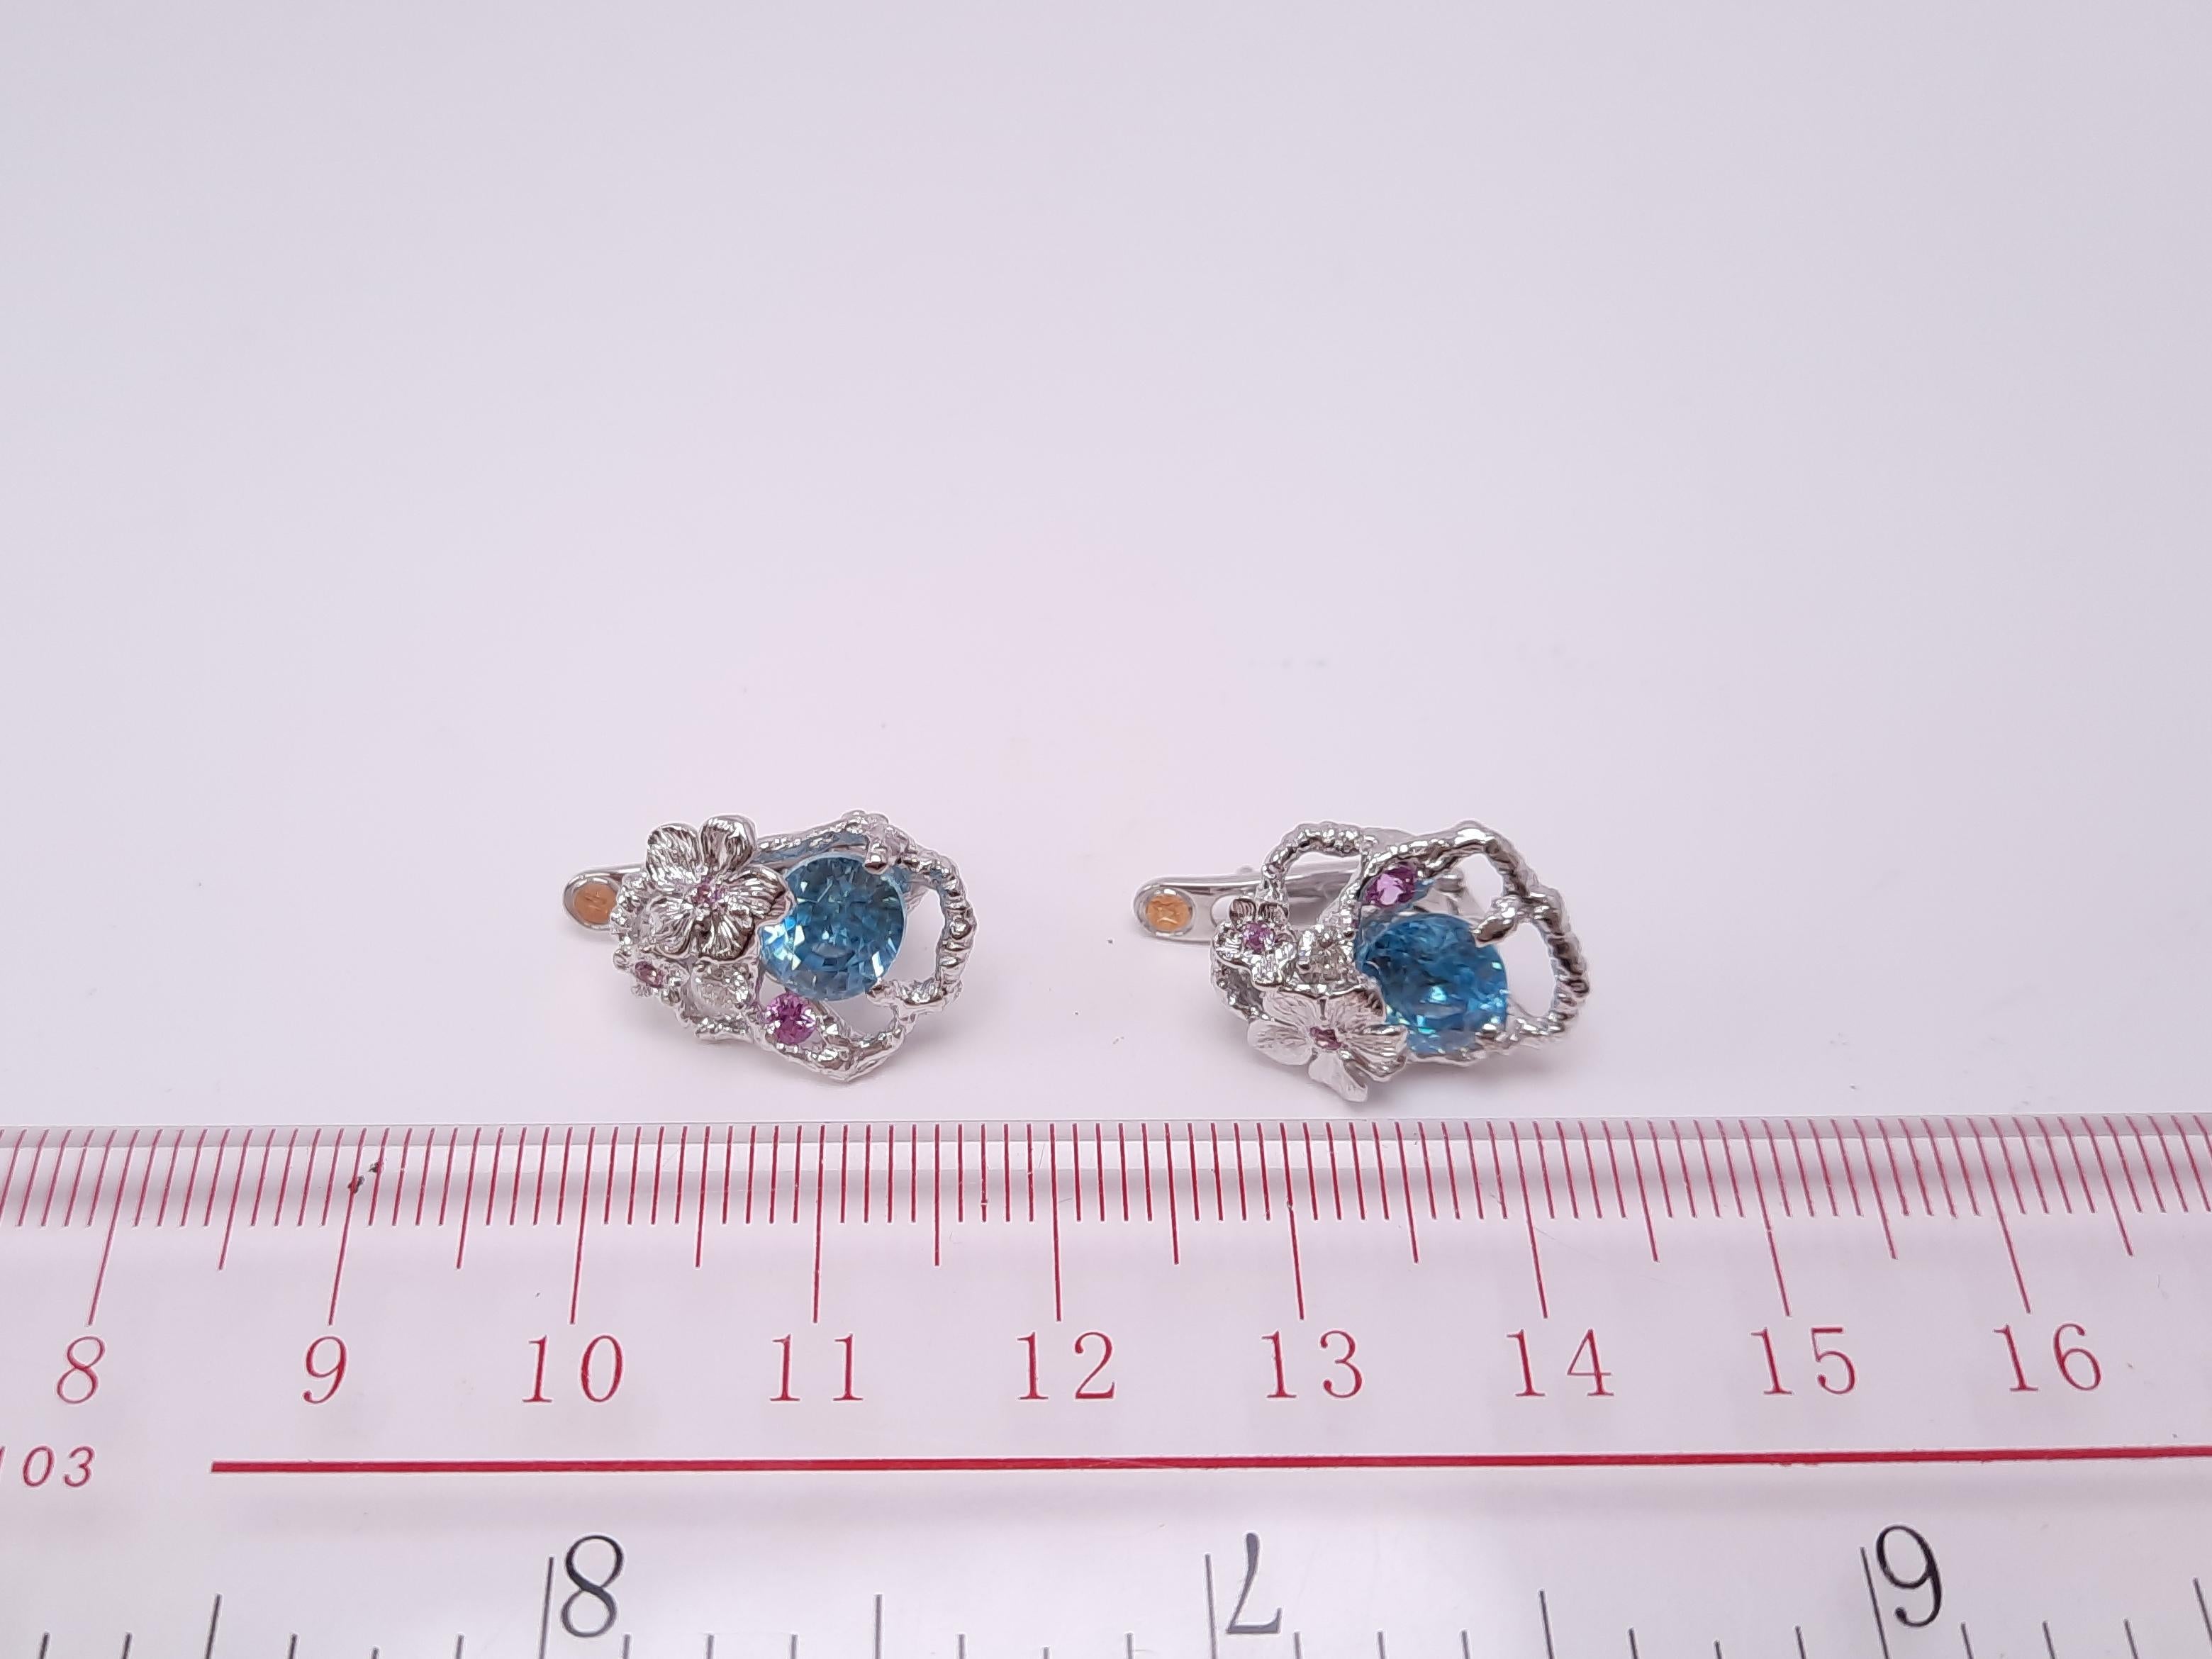 This handmade earrings made with sky blue natural Zircons, dazzling diamonds, and fashionable rose colour sapphires from MOISEIKIN🄬 remind you of the pagoda blue sky and the tale of Snow Queen. Or one may think of the ocean. The blue Zircons with